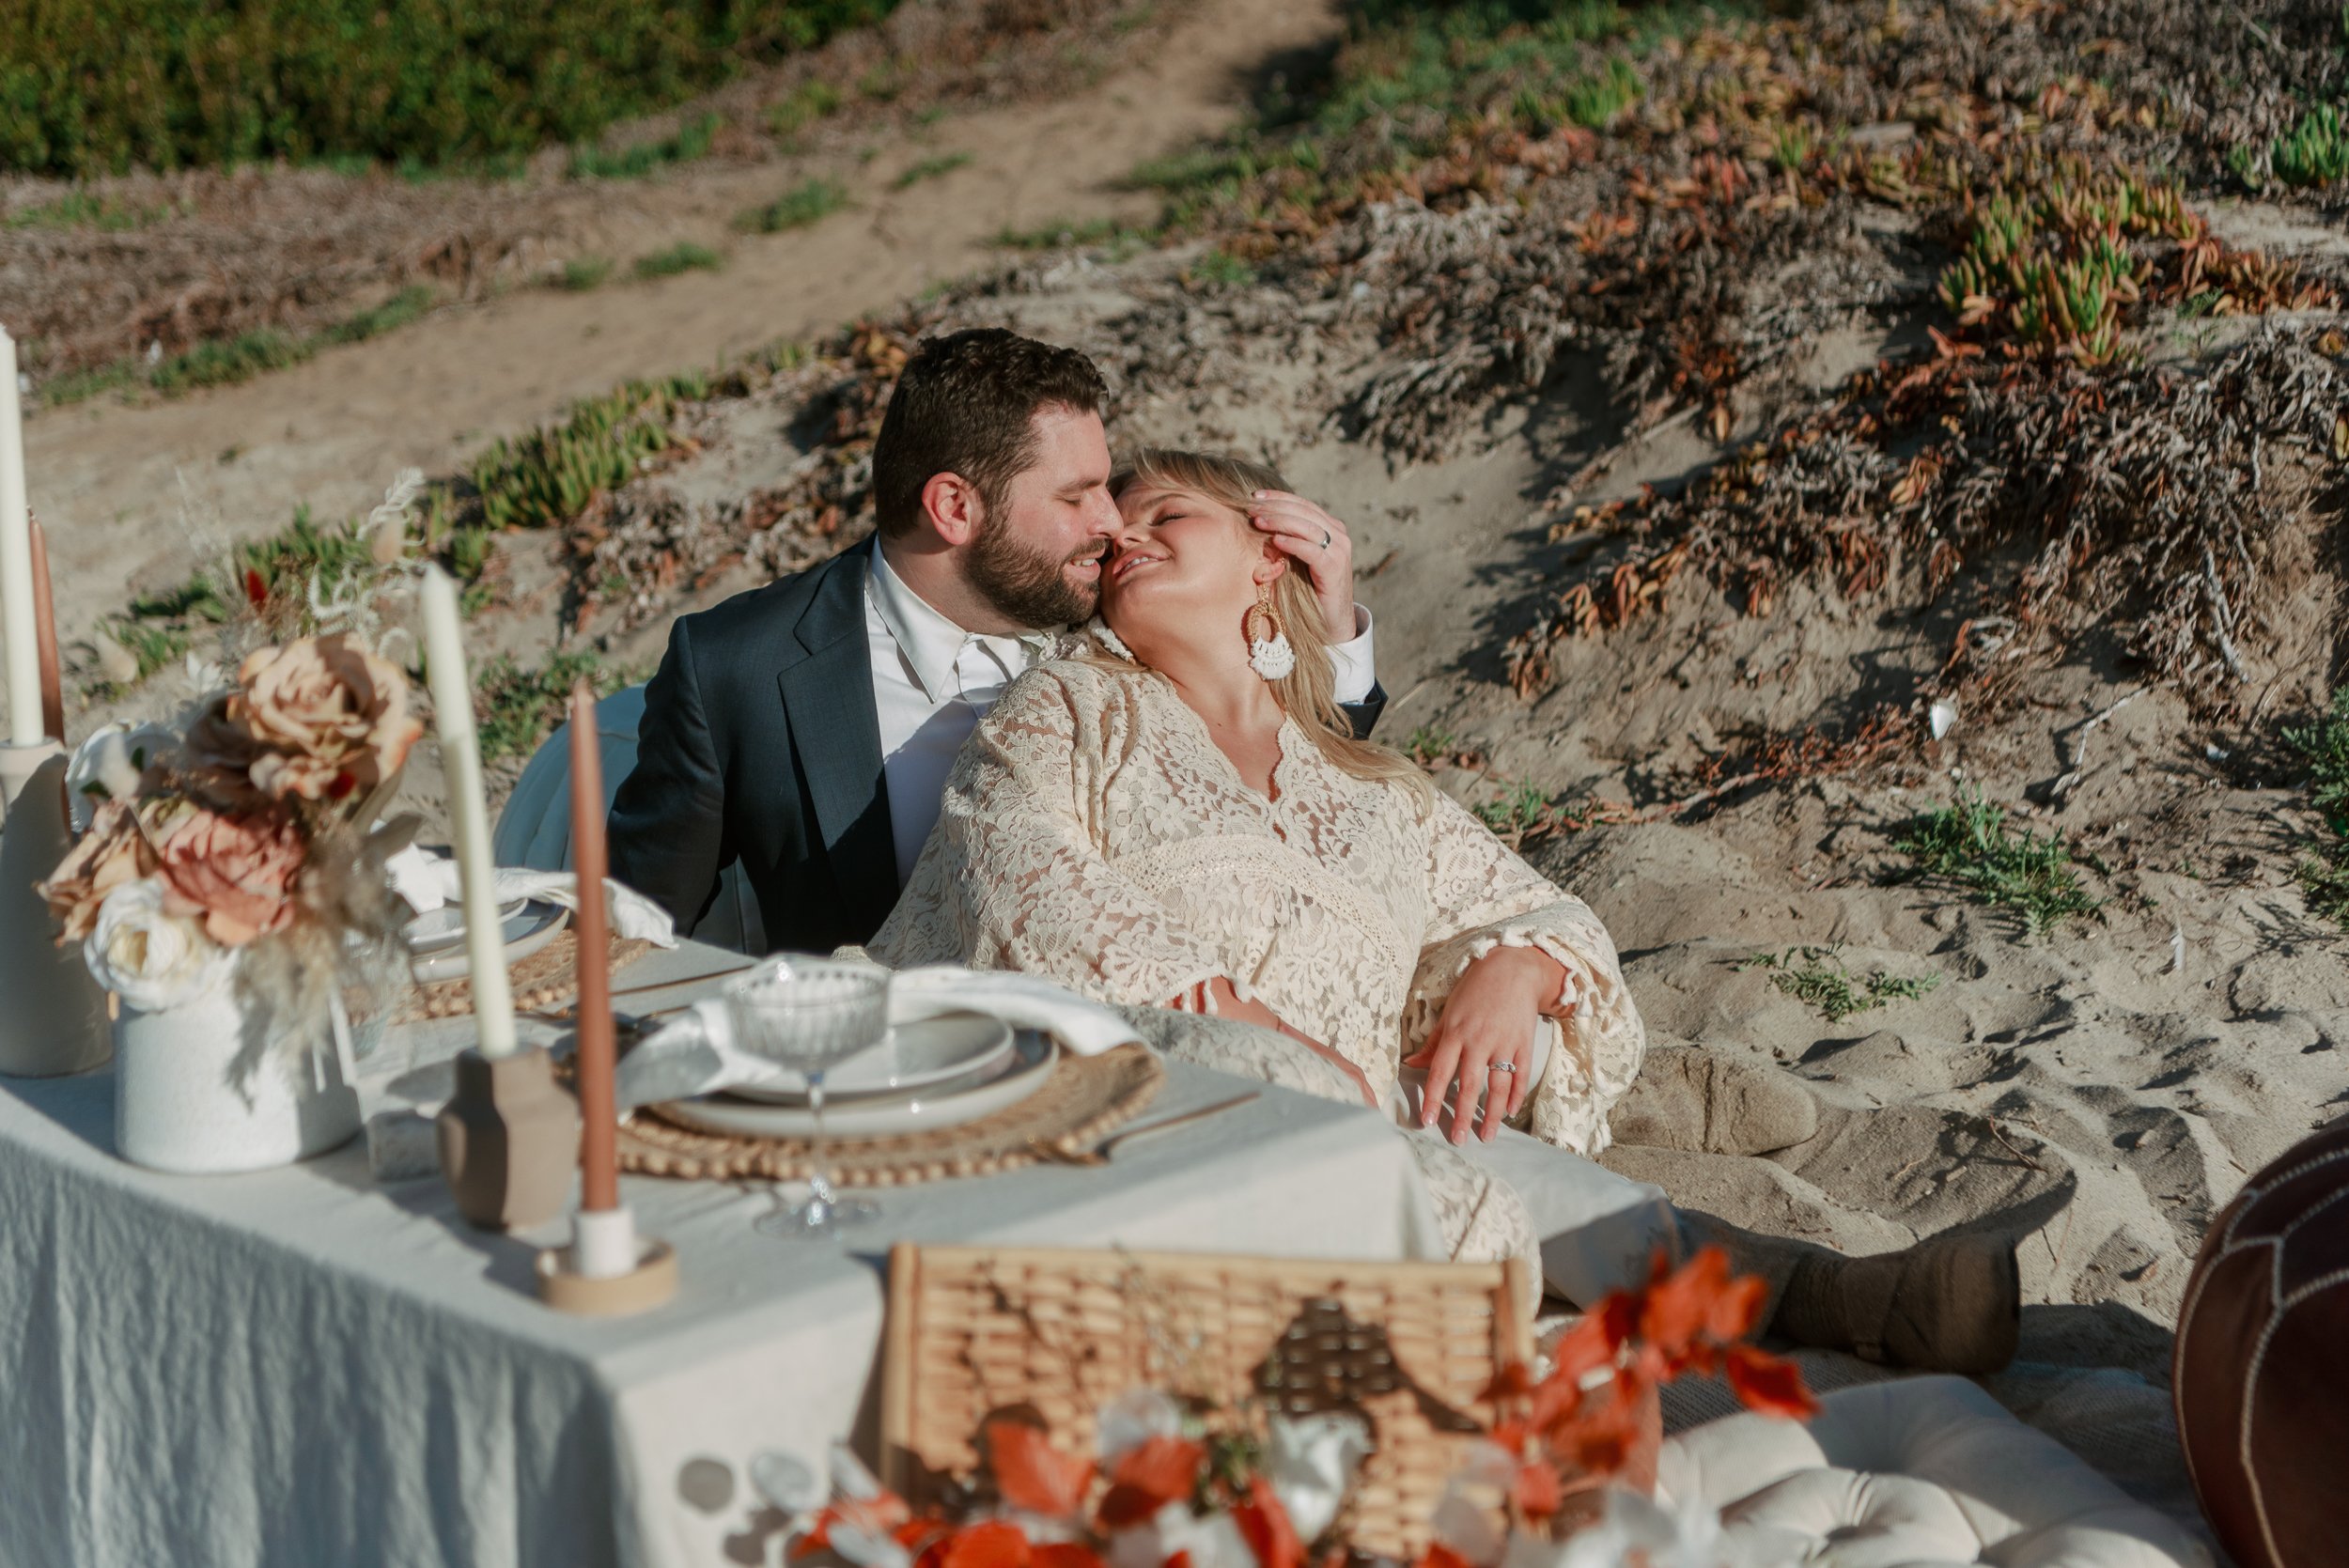 Southern California Beach Picnic for a very intimate elopement or wedding. Contact us to see how a picnic can fit into your elopement day!